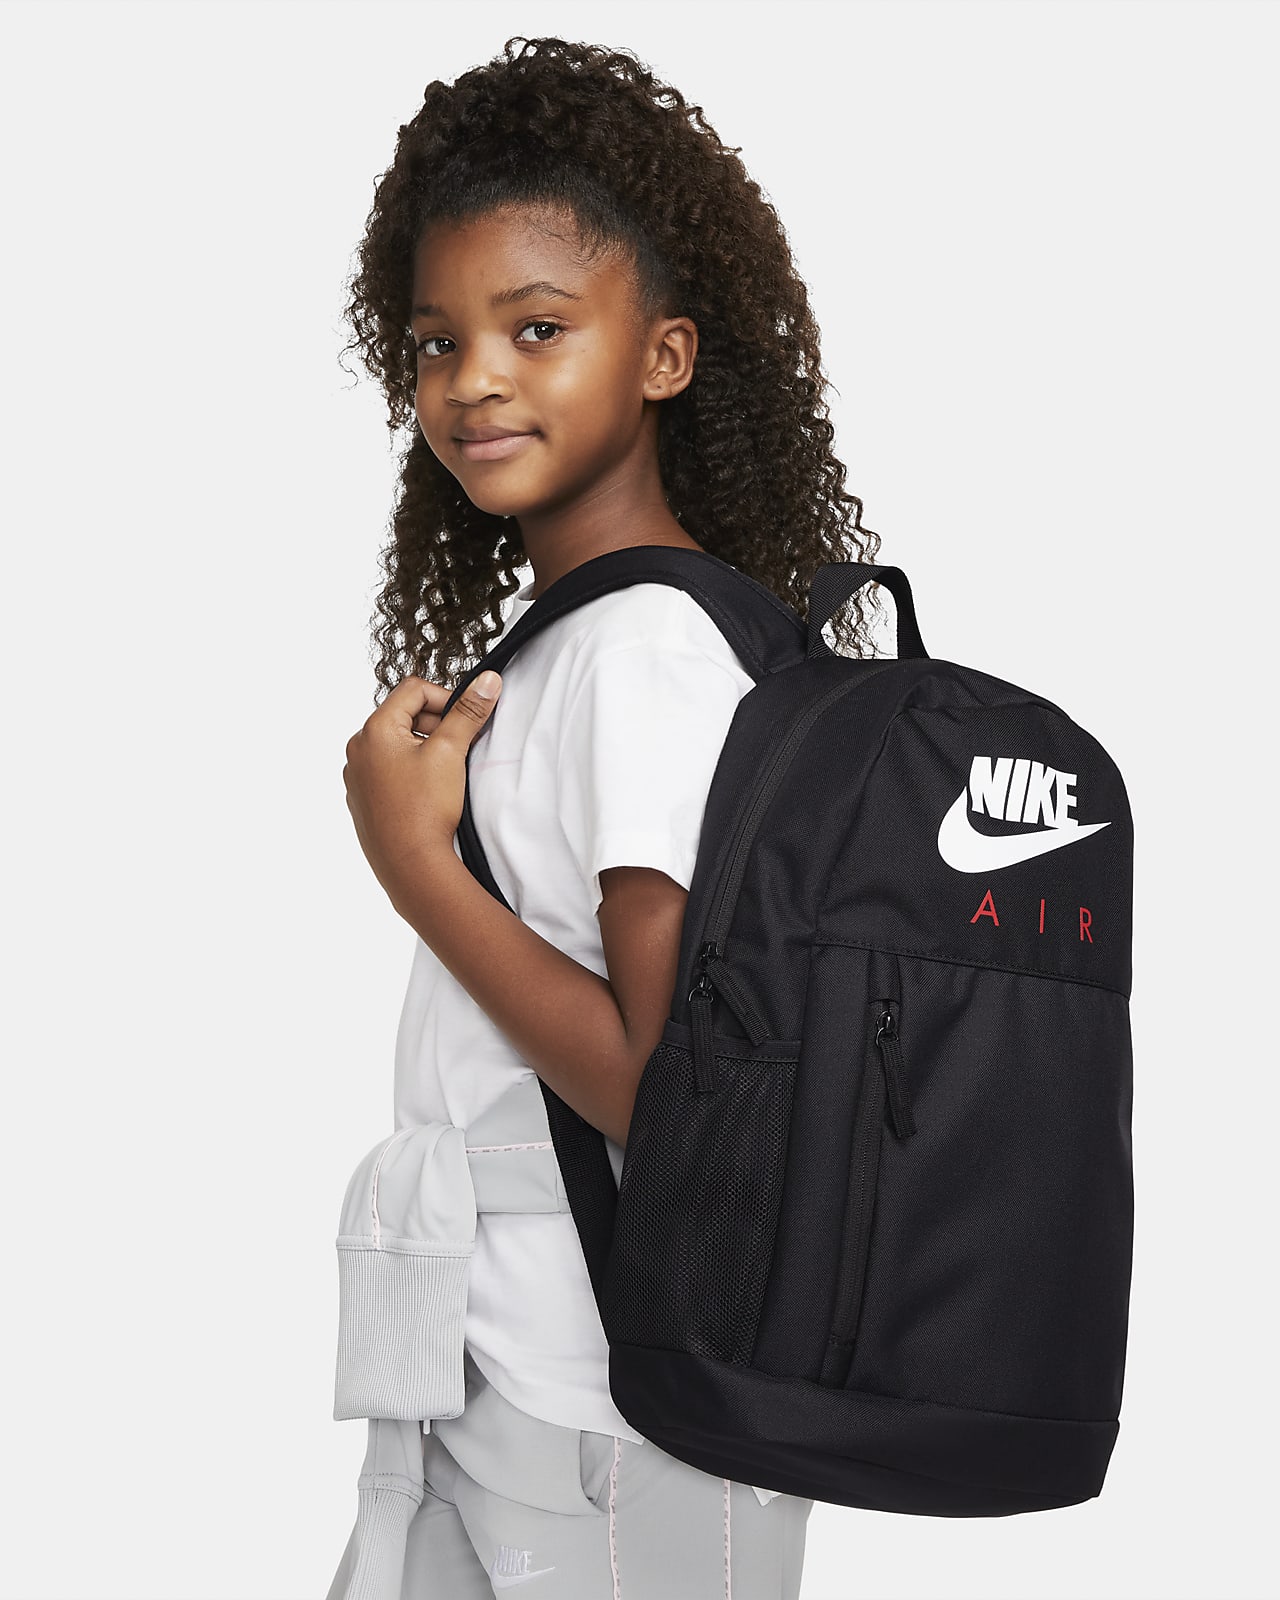 nike rucksack with pencil case